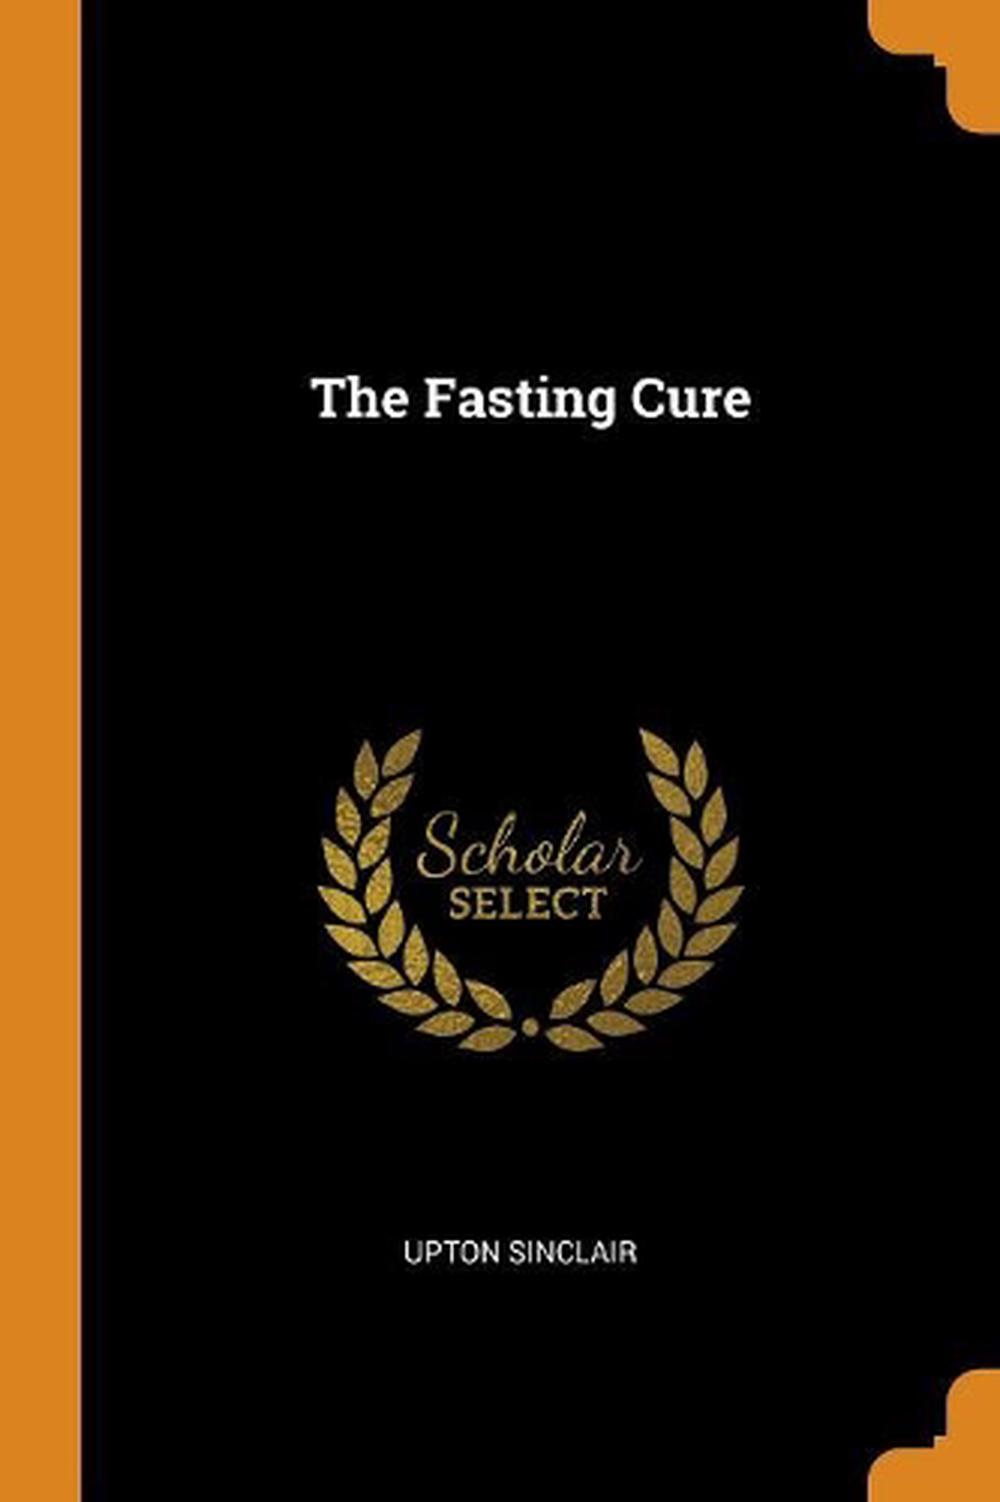 The Fasting Cure by Upton Sinclair